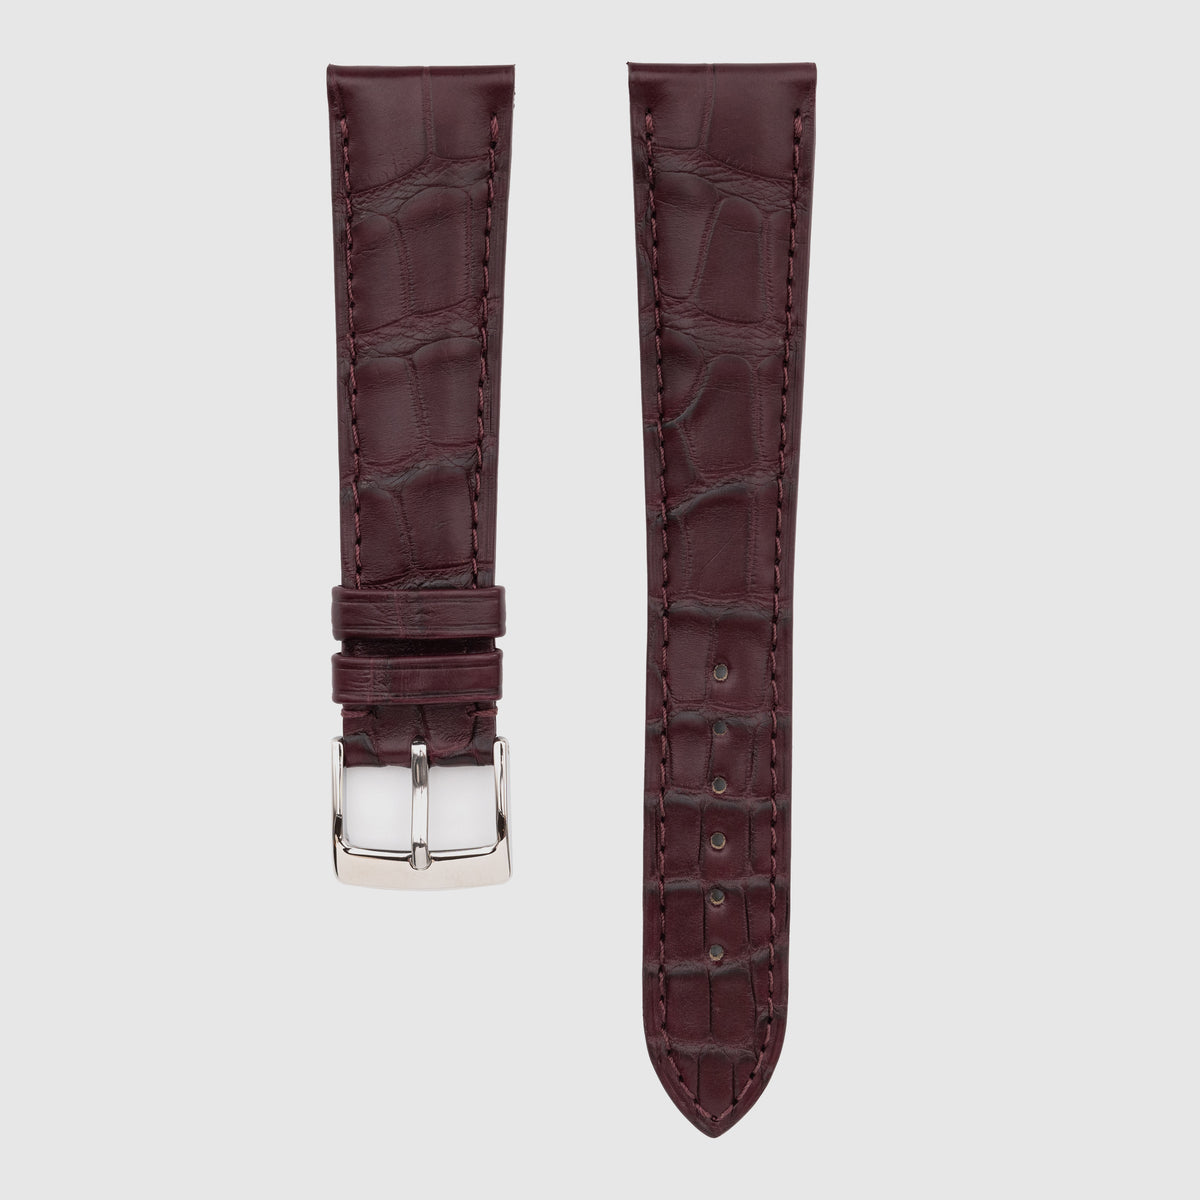 Camille Fournet Strap Alligator Matte Square Scales Crushed Raspberry (Multiple Sizes)